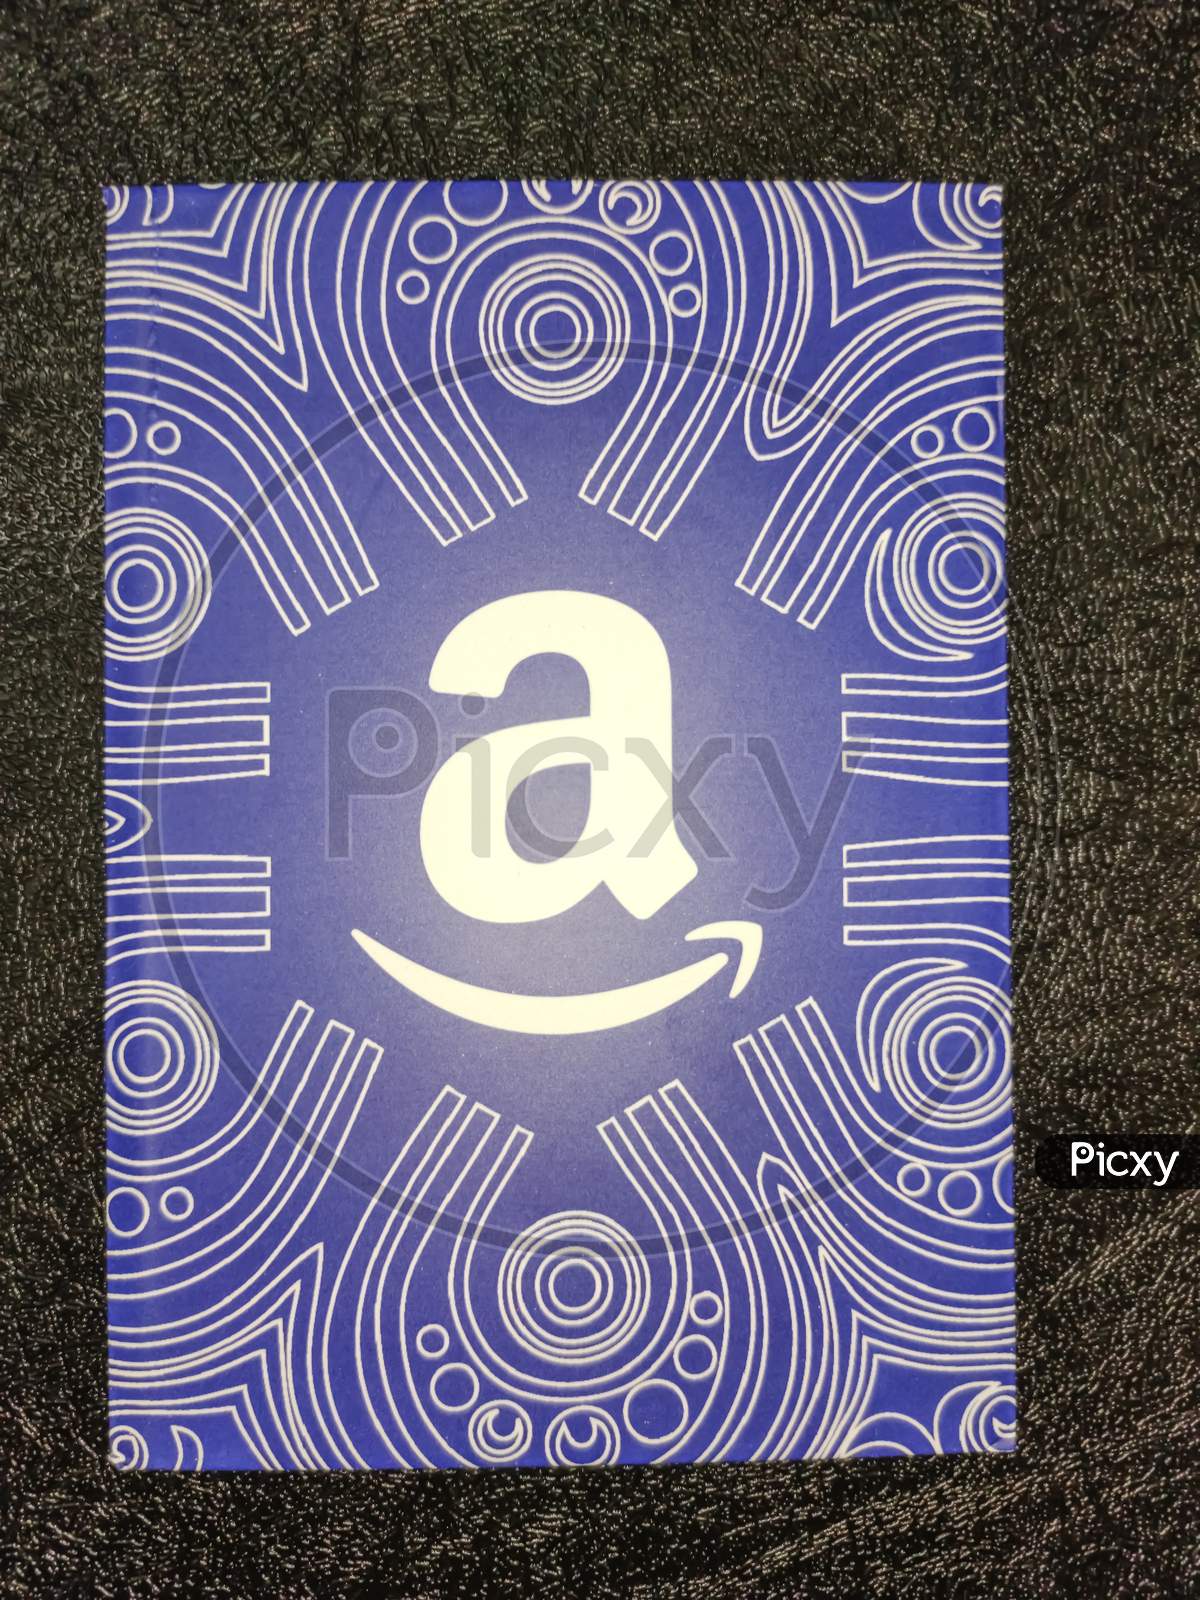 Amazon gift card with black texture background, which allows the recipient to purchase items from the Amazon.com website